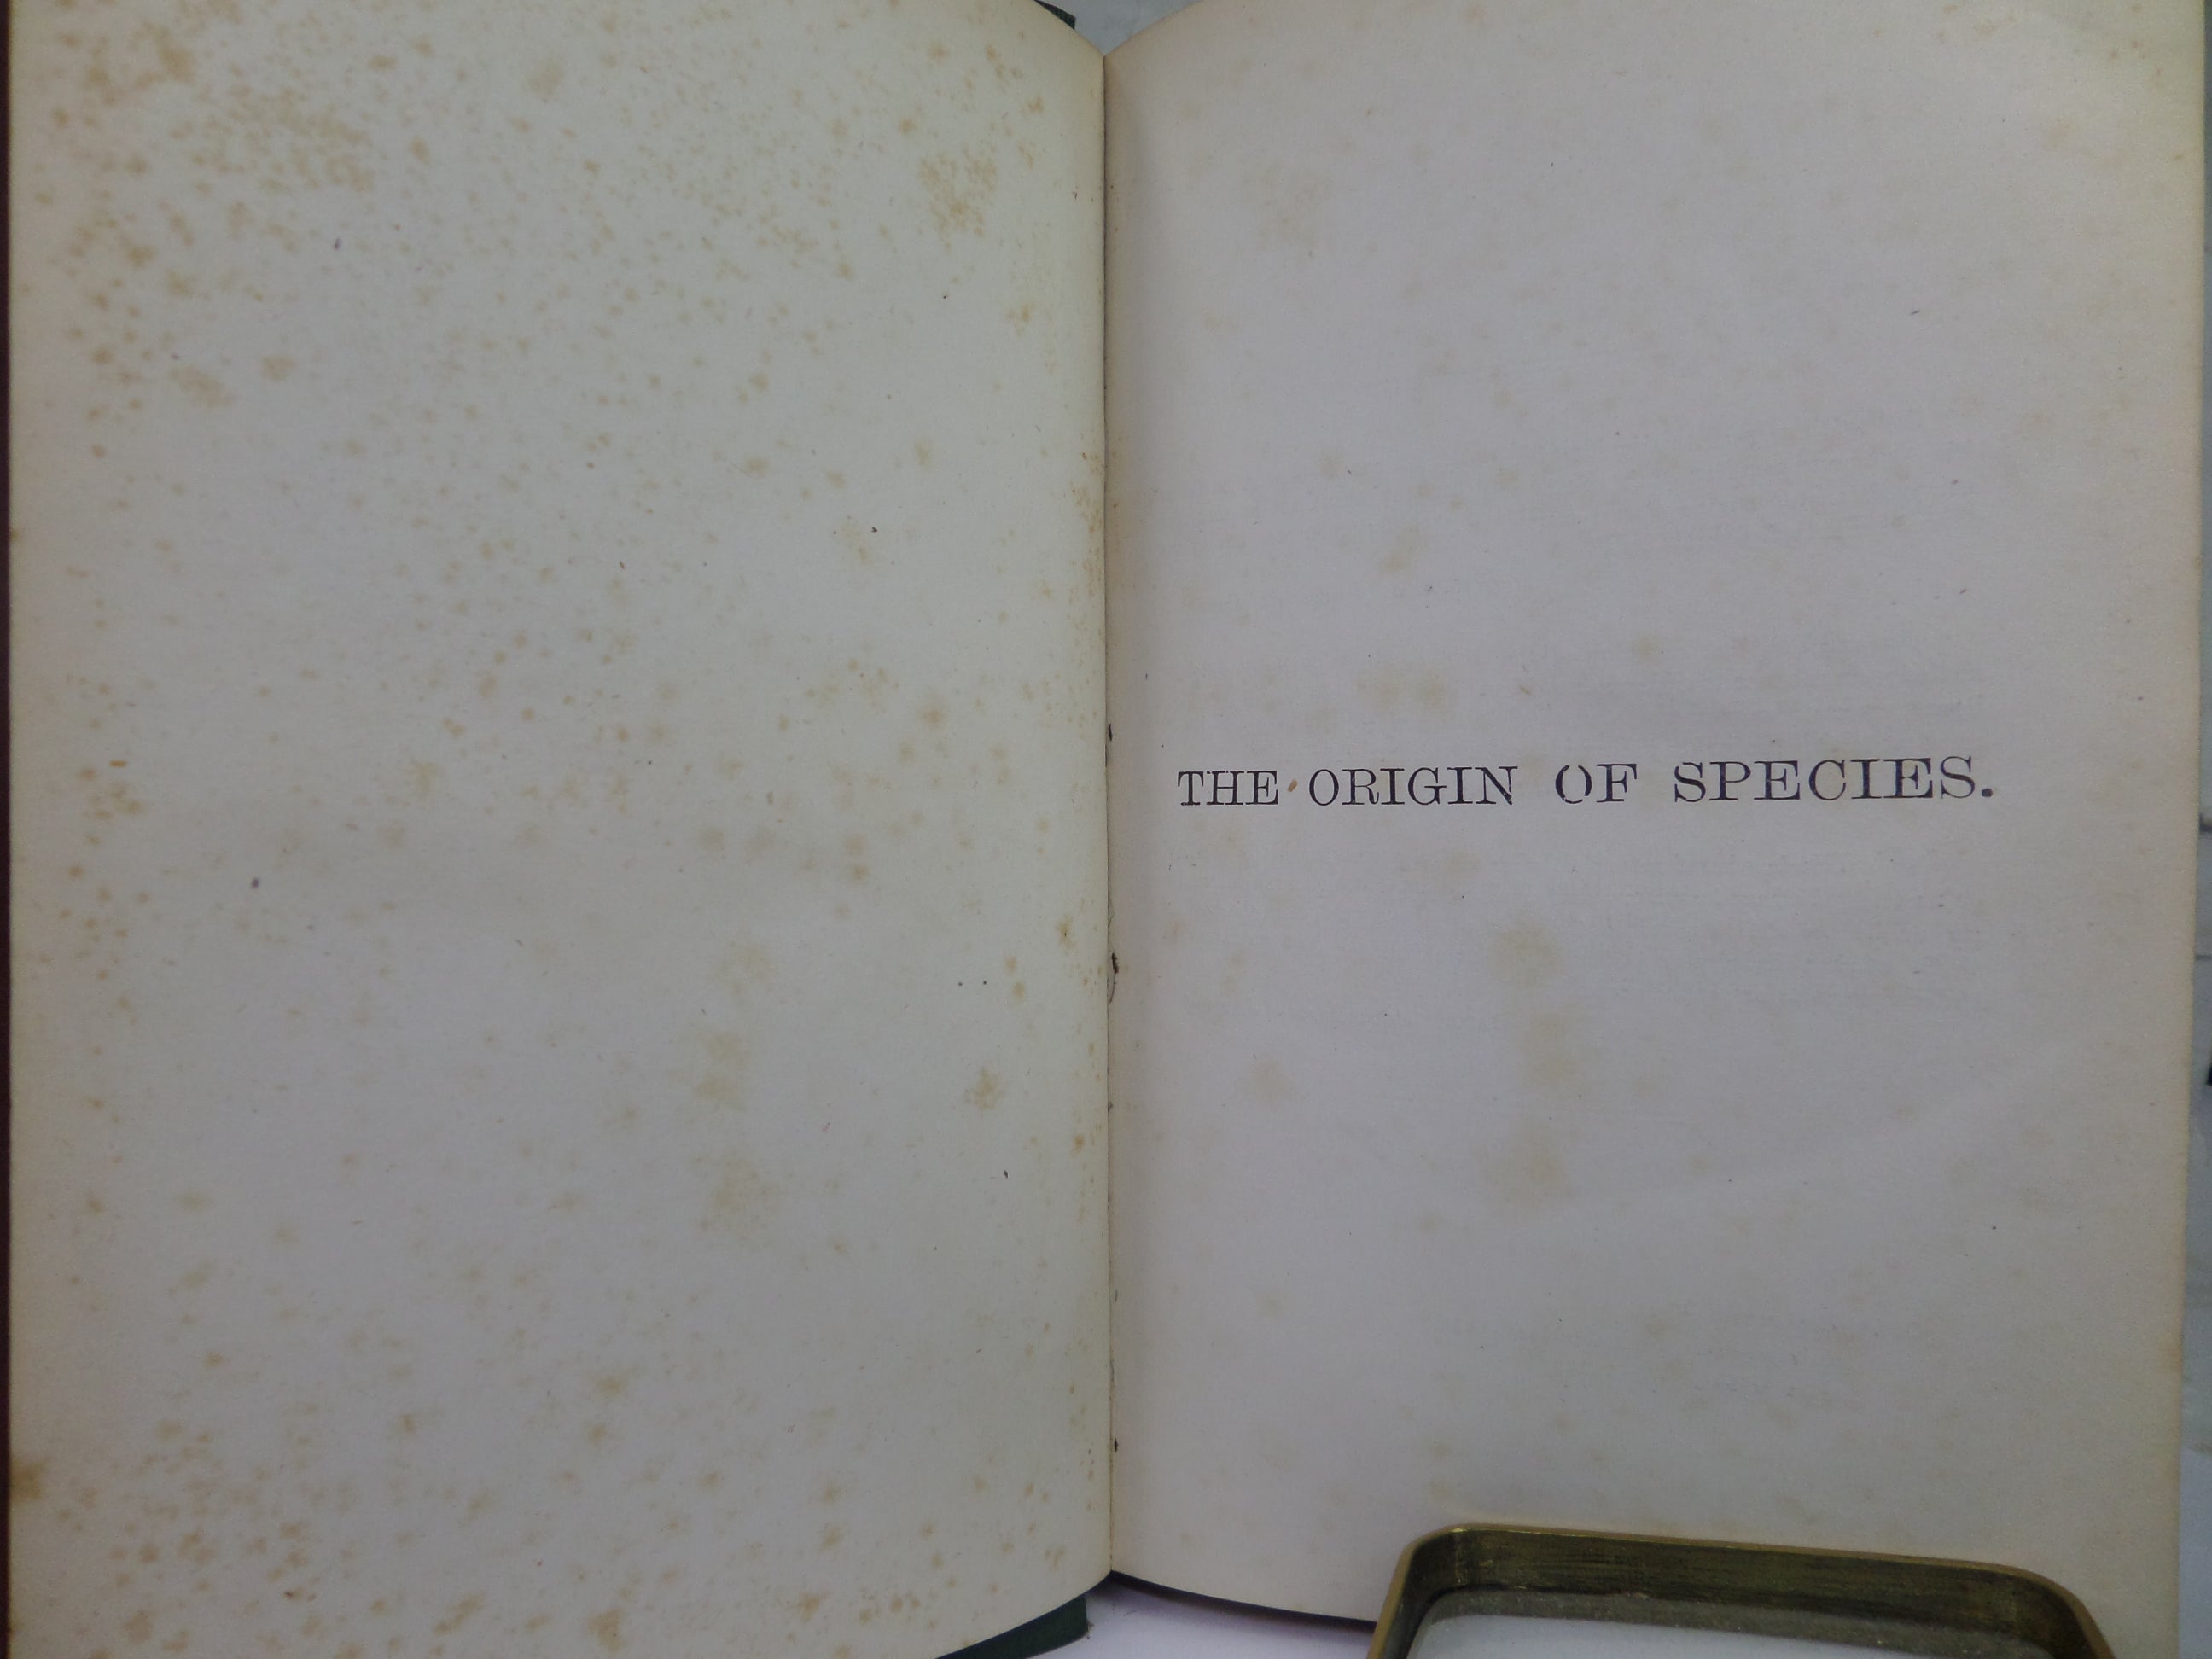 THE ORIGIN OF SPECIES BY MEANS OF NATURAL SELECTION BY CHARLES DARWIN 1875